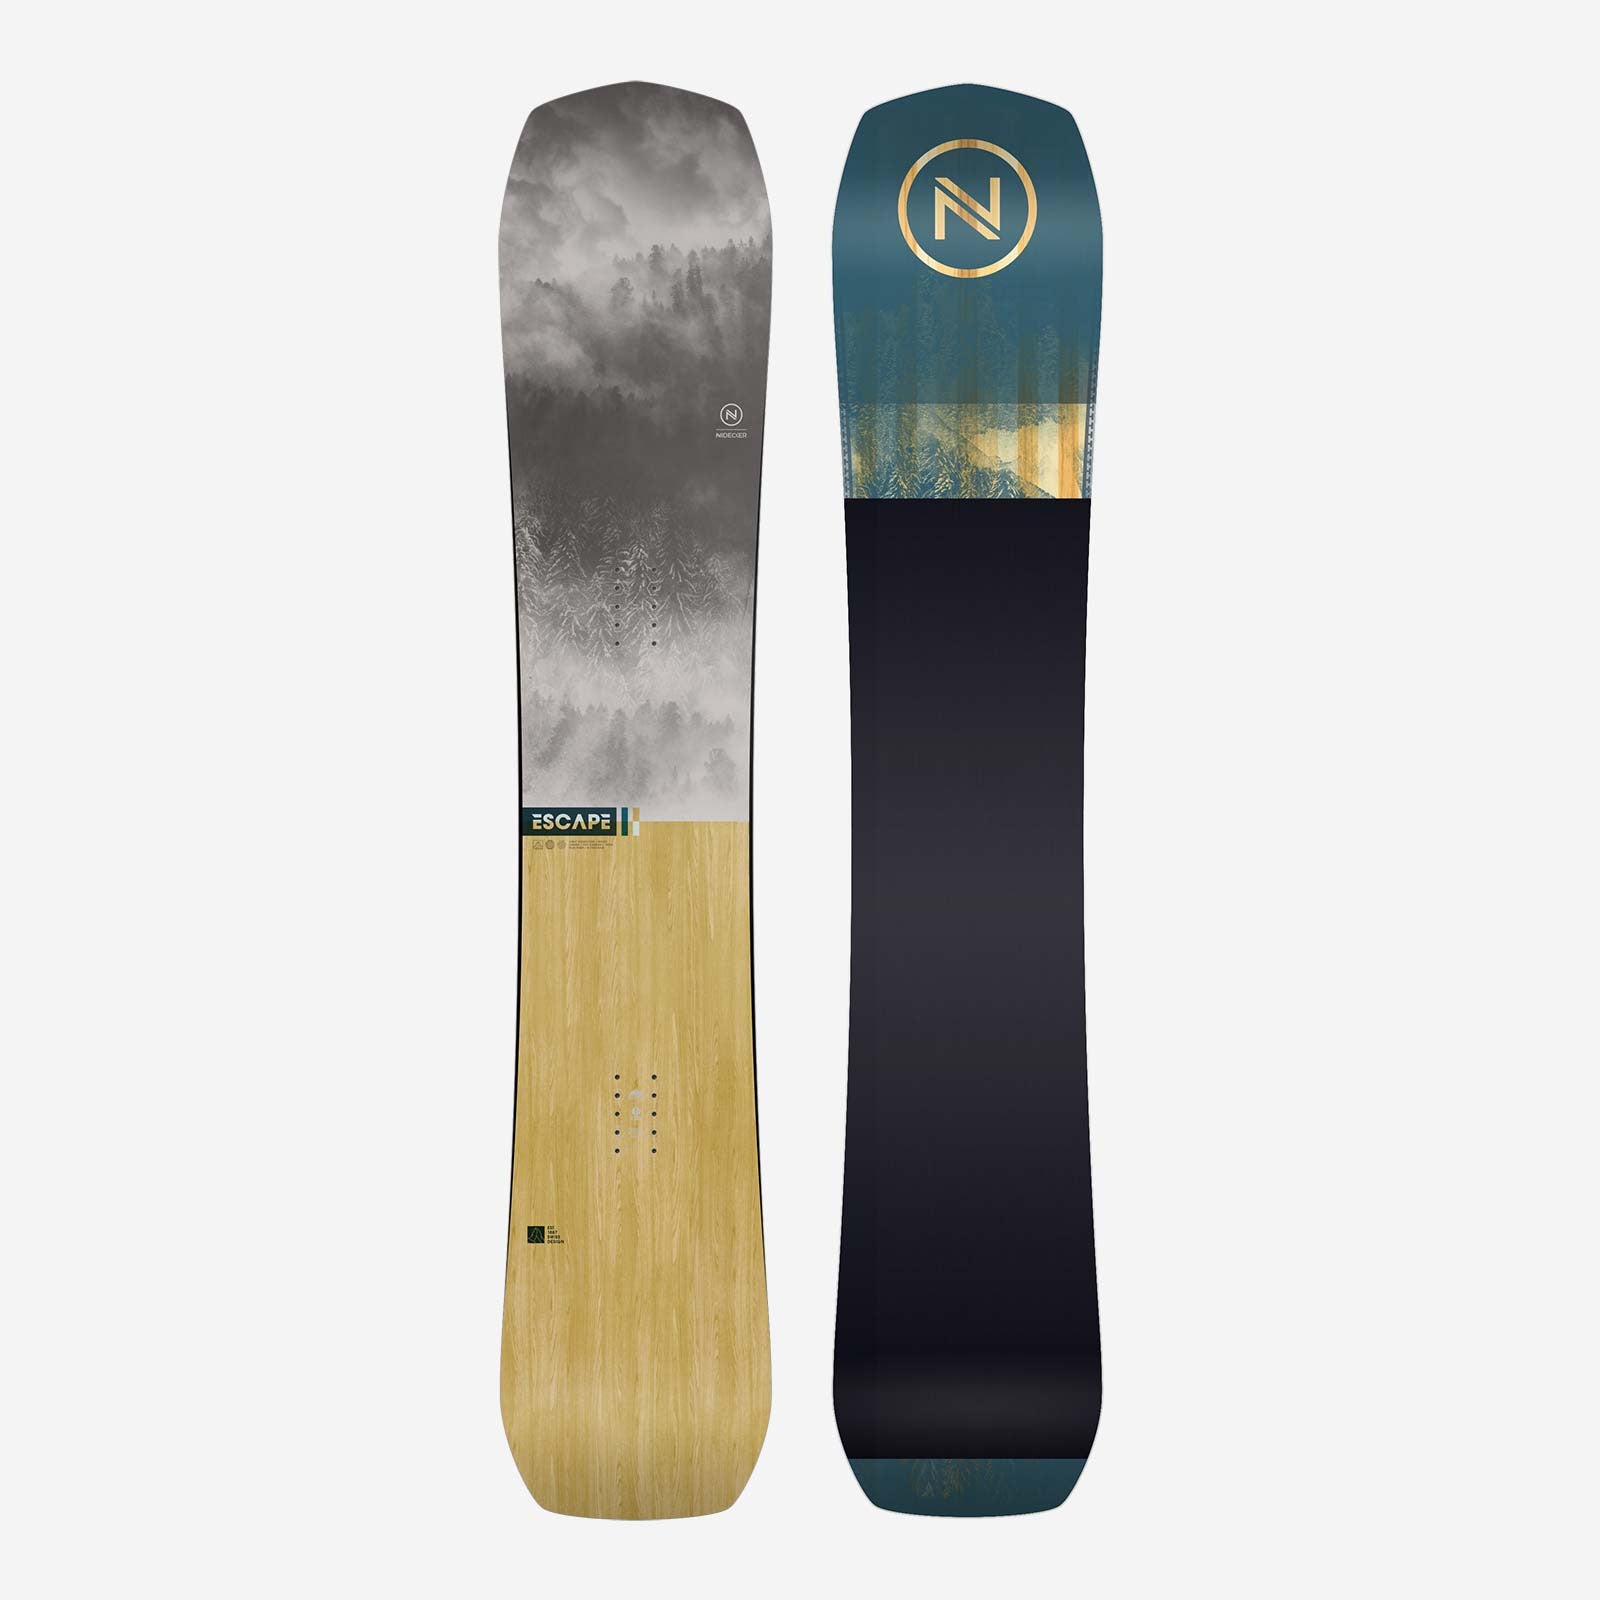 Our bestselling all-mountain deck features a brand new shape for 2023, with a modern blunt tail and a diamond nose helping the Escape to crush any terrain. Under the hood, we’ve kept the same innovative construction that earned this board its reputation for balanced performance.